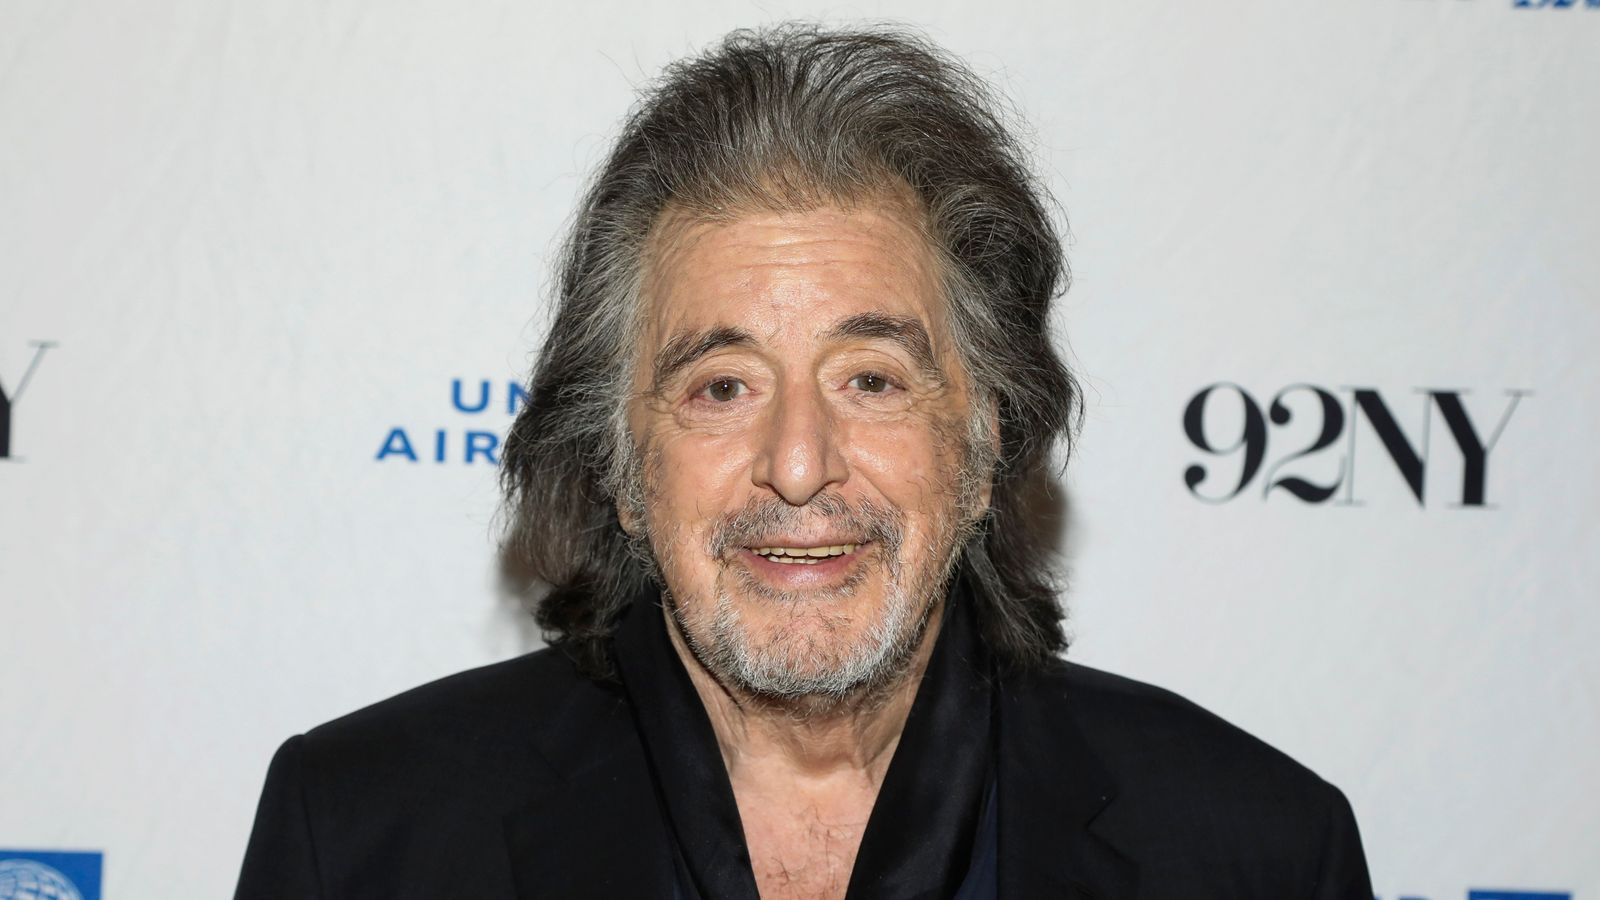 Al Pacino: Godfather actor, 83, welcomes new baby with 29-year-old partner